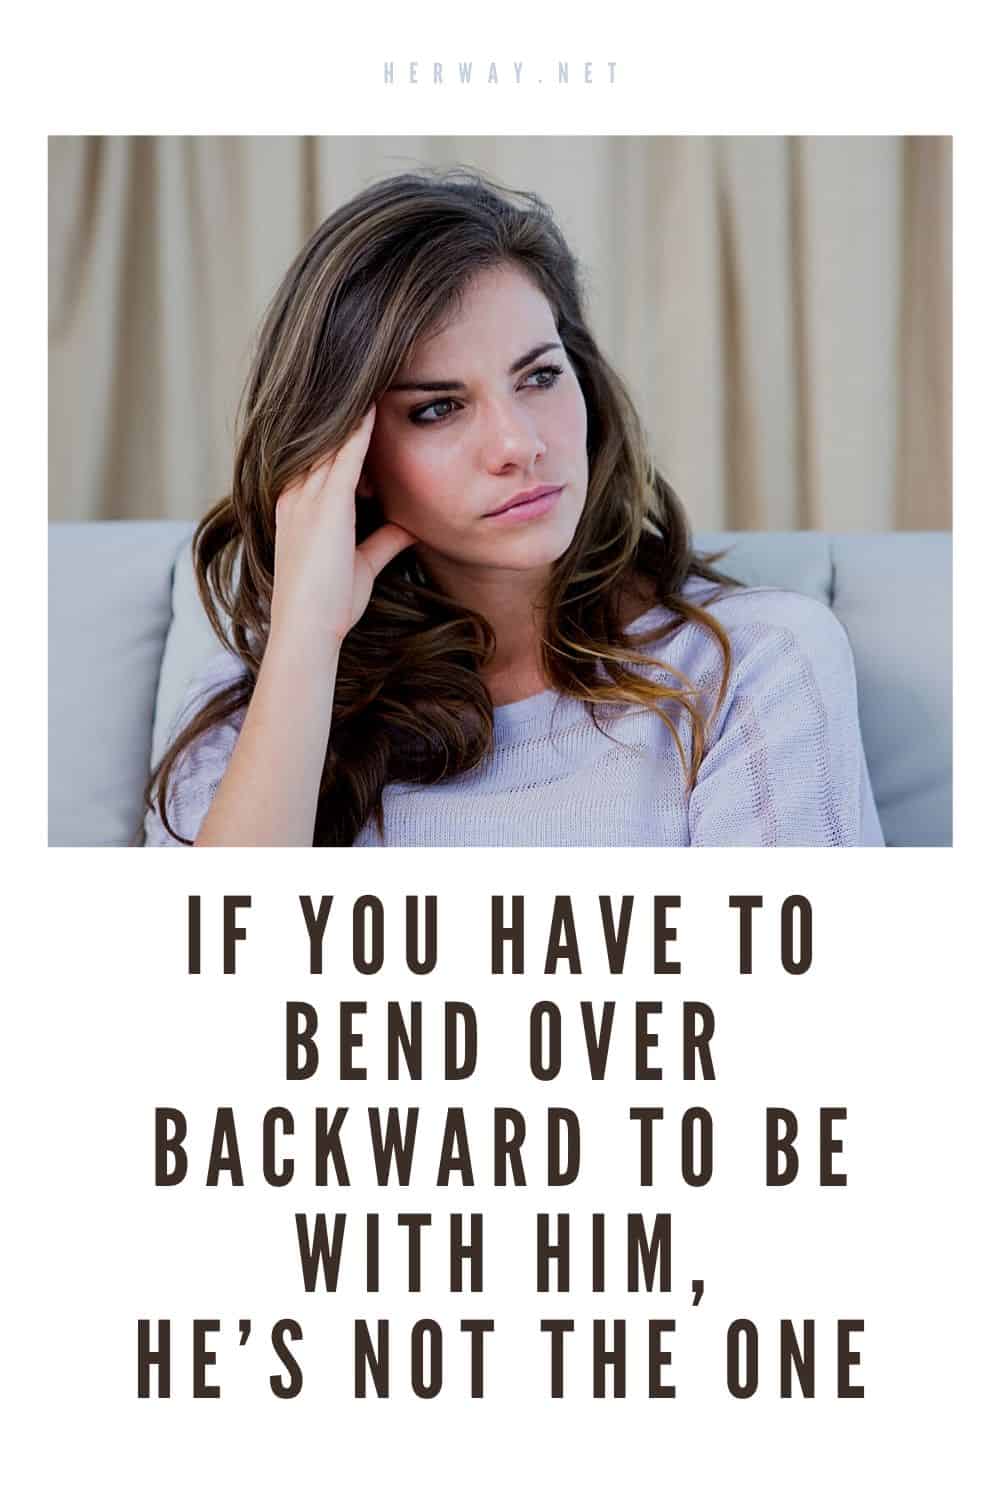 If You Have To Bend Over Backward To Be With Him, He’s Not The One